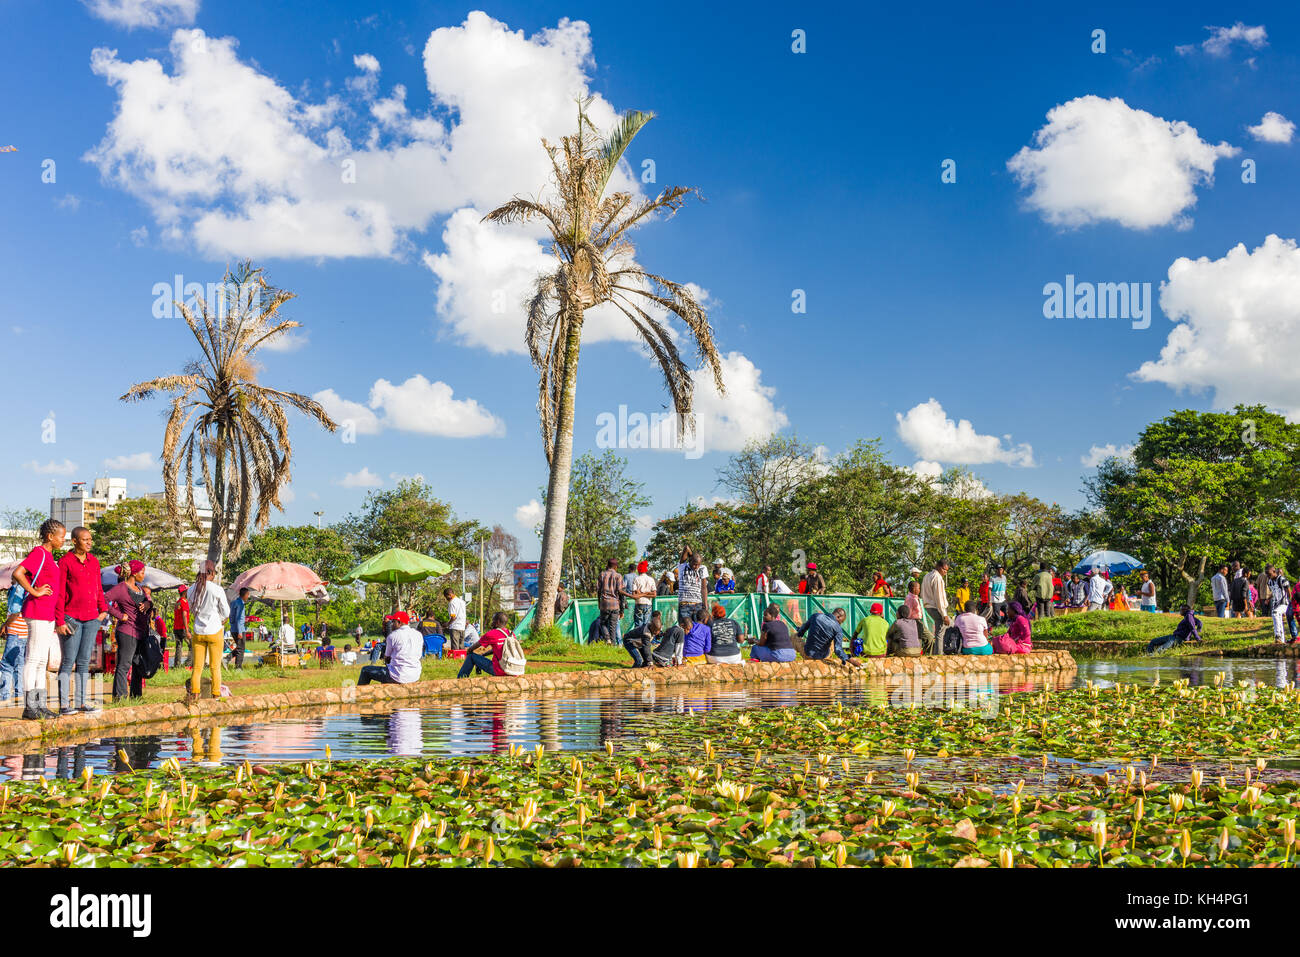 People standing by a lily lake in Uhuru Park on a sunny day, Nairobi, Kenya Stock Photo